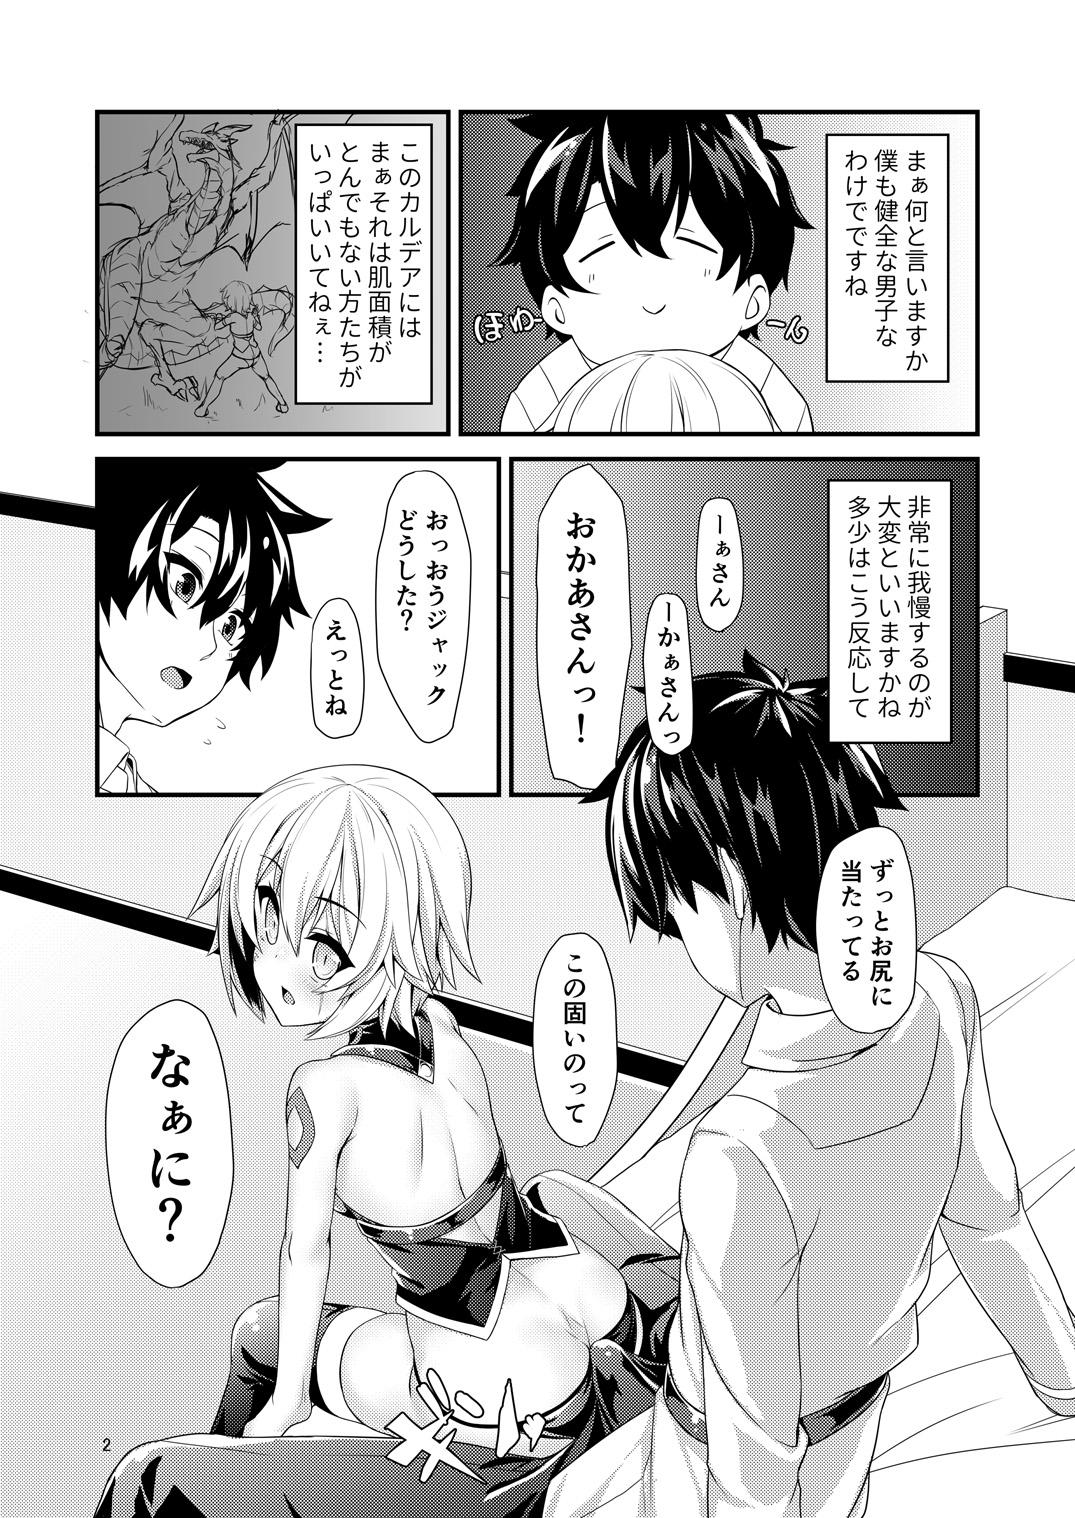 Couple Junai Ripper - Fate grand order Hairy - Page 5